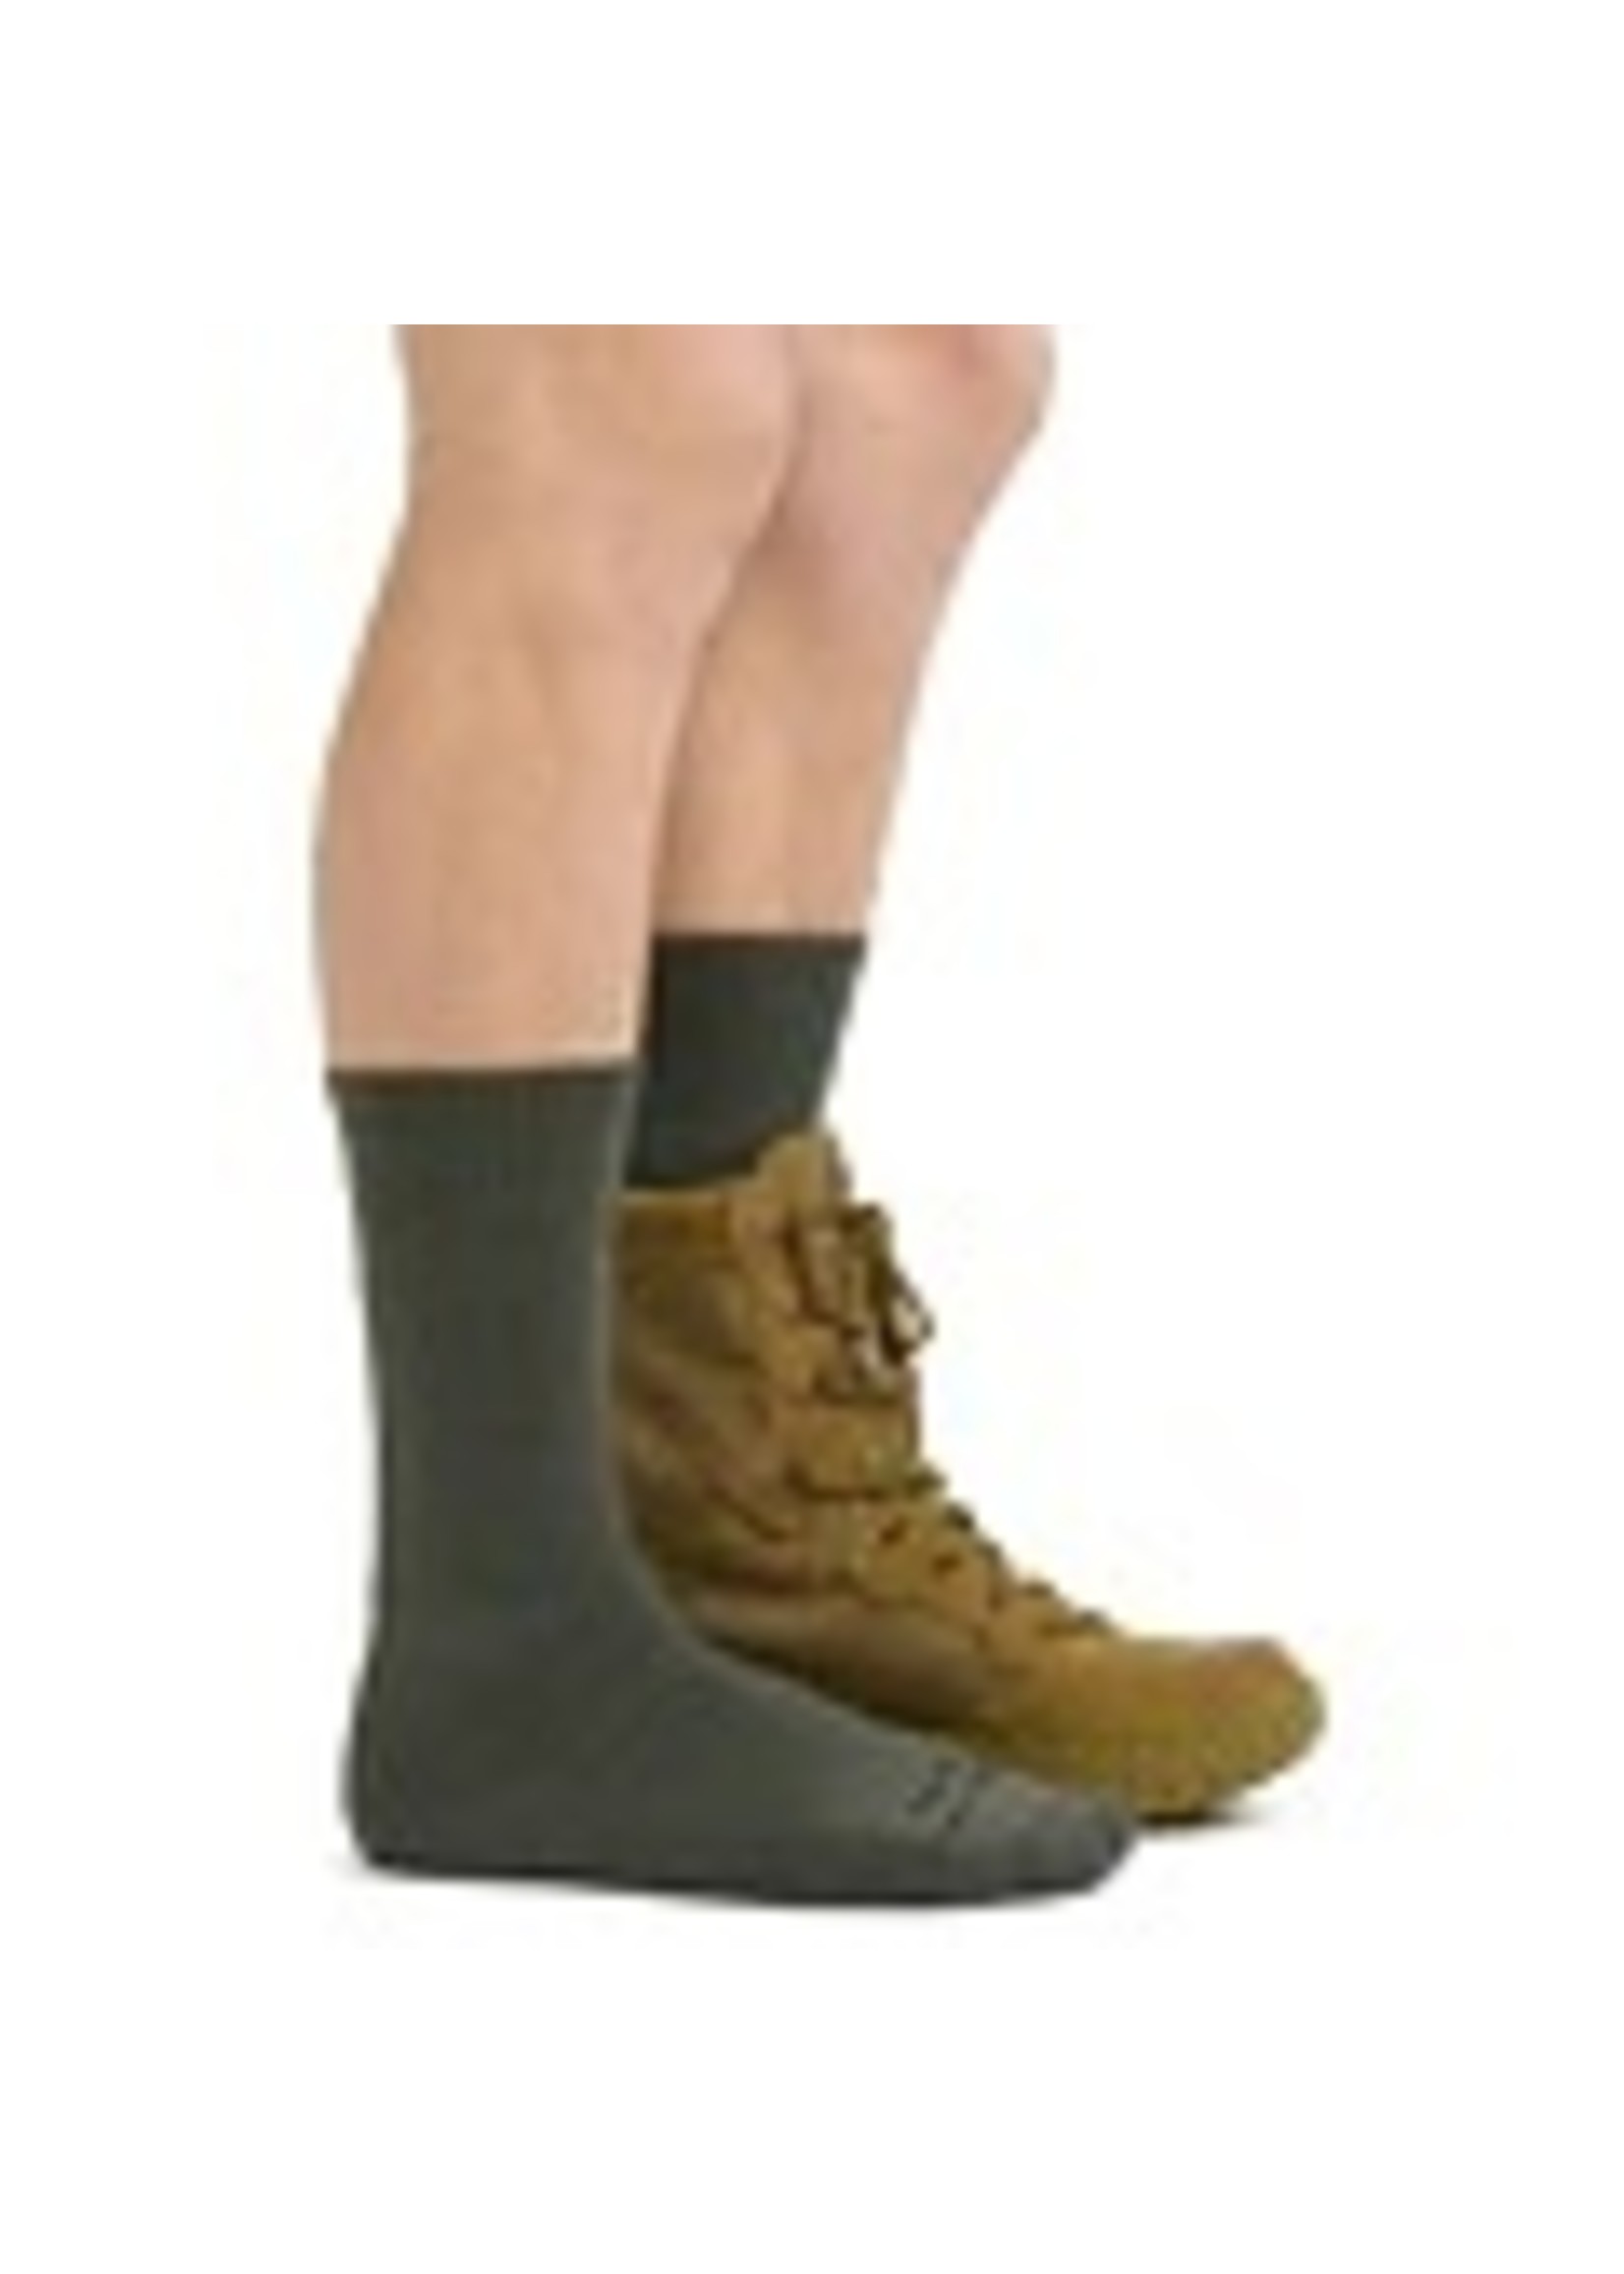 Darn Tough Boot Sock Midweight Tactical with Full Cushion